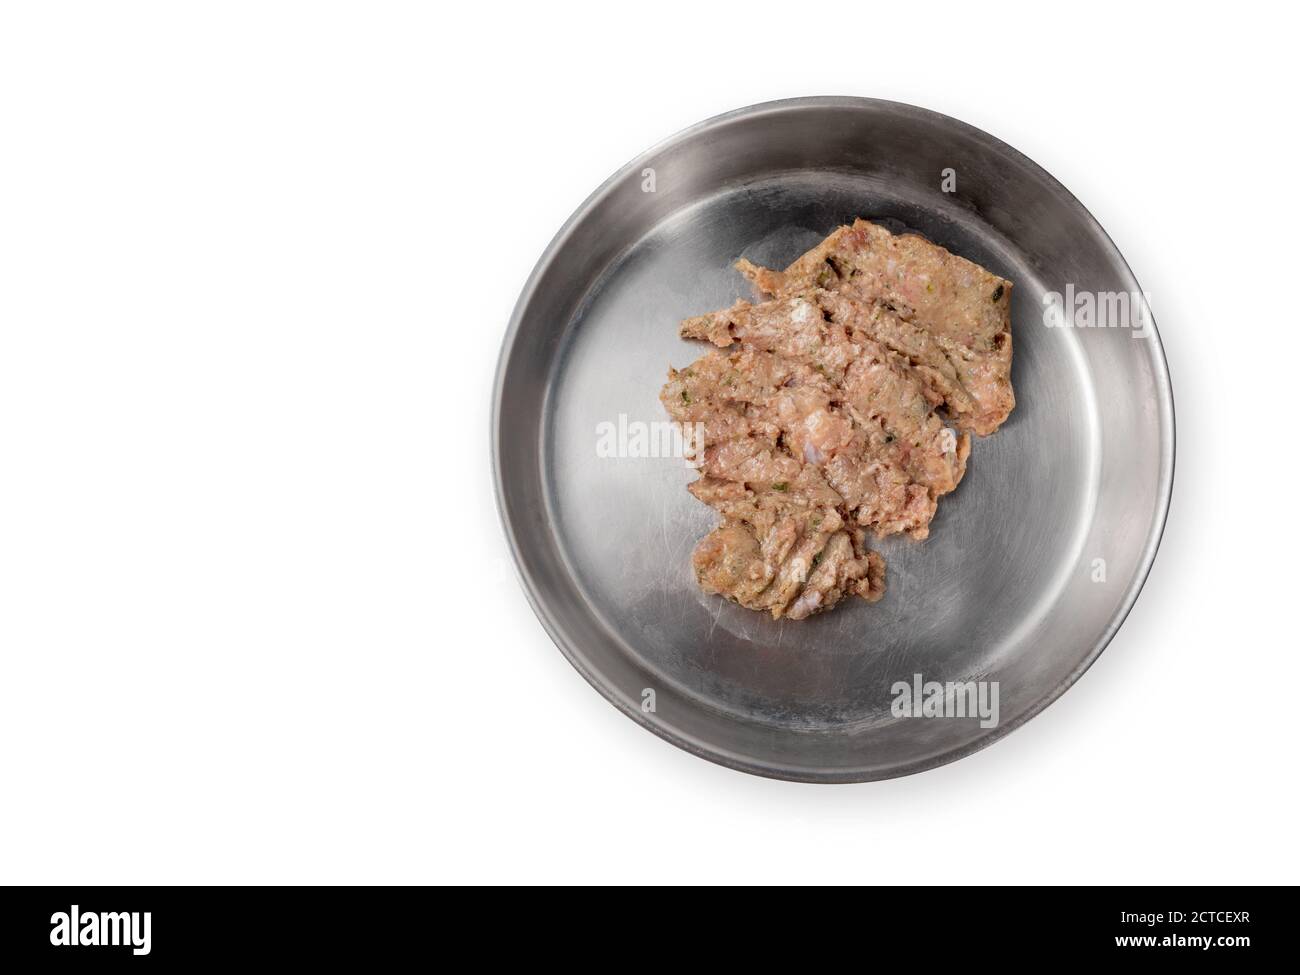 Top view of pet food bowl with raw ground turkey meat, inclusive backs, necks, liver and heart. Stainless steel dish. Concept for raw food diet. Stock Photo